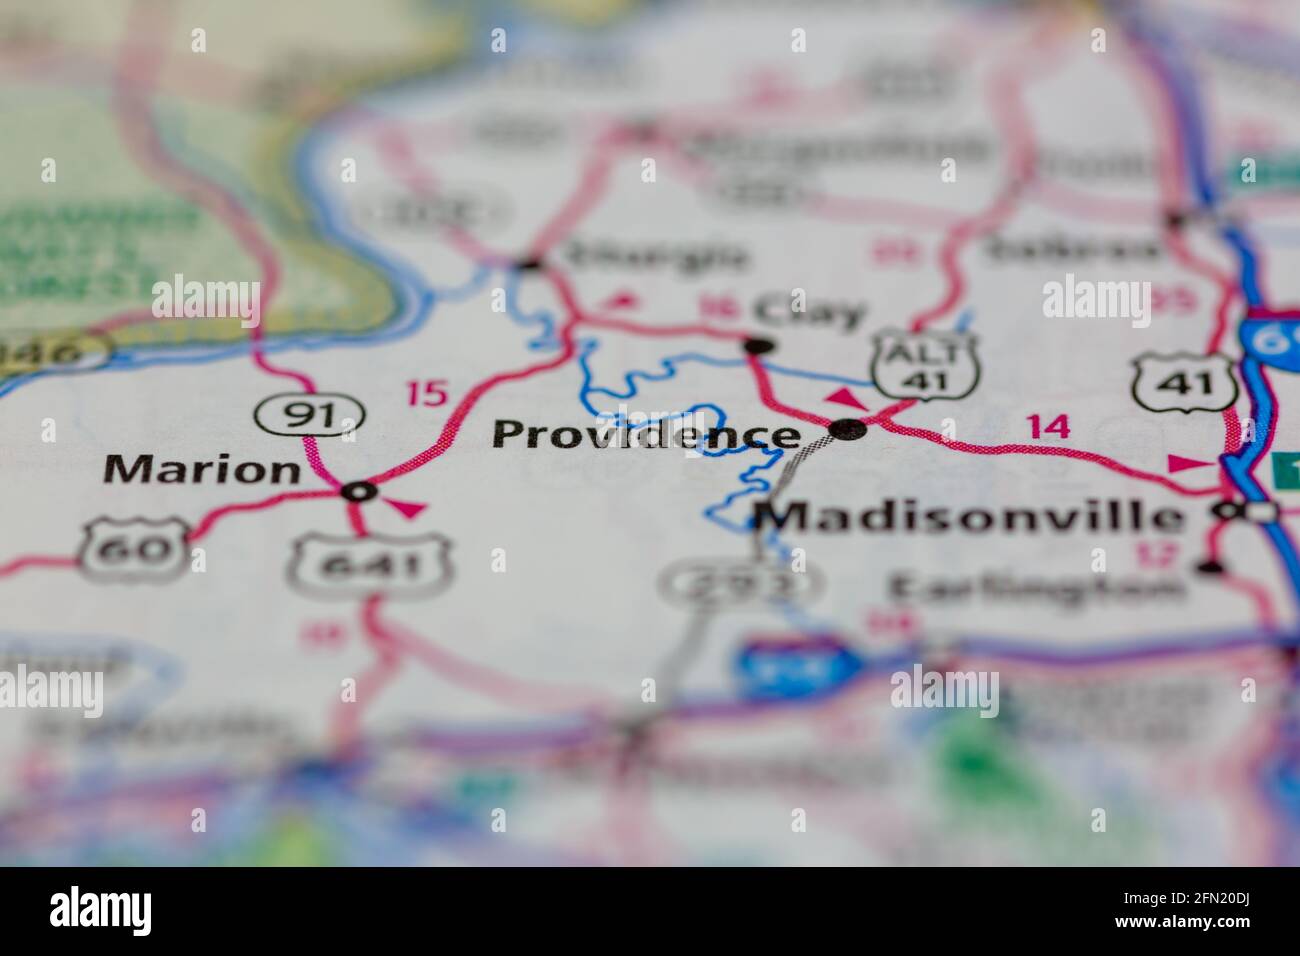 Providence Kentucky USA shown on a Geography map or road map Stock Photo